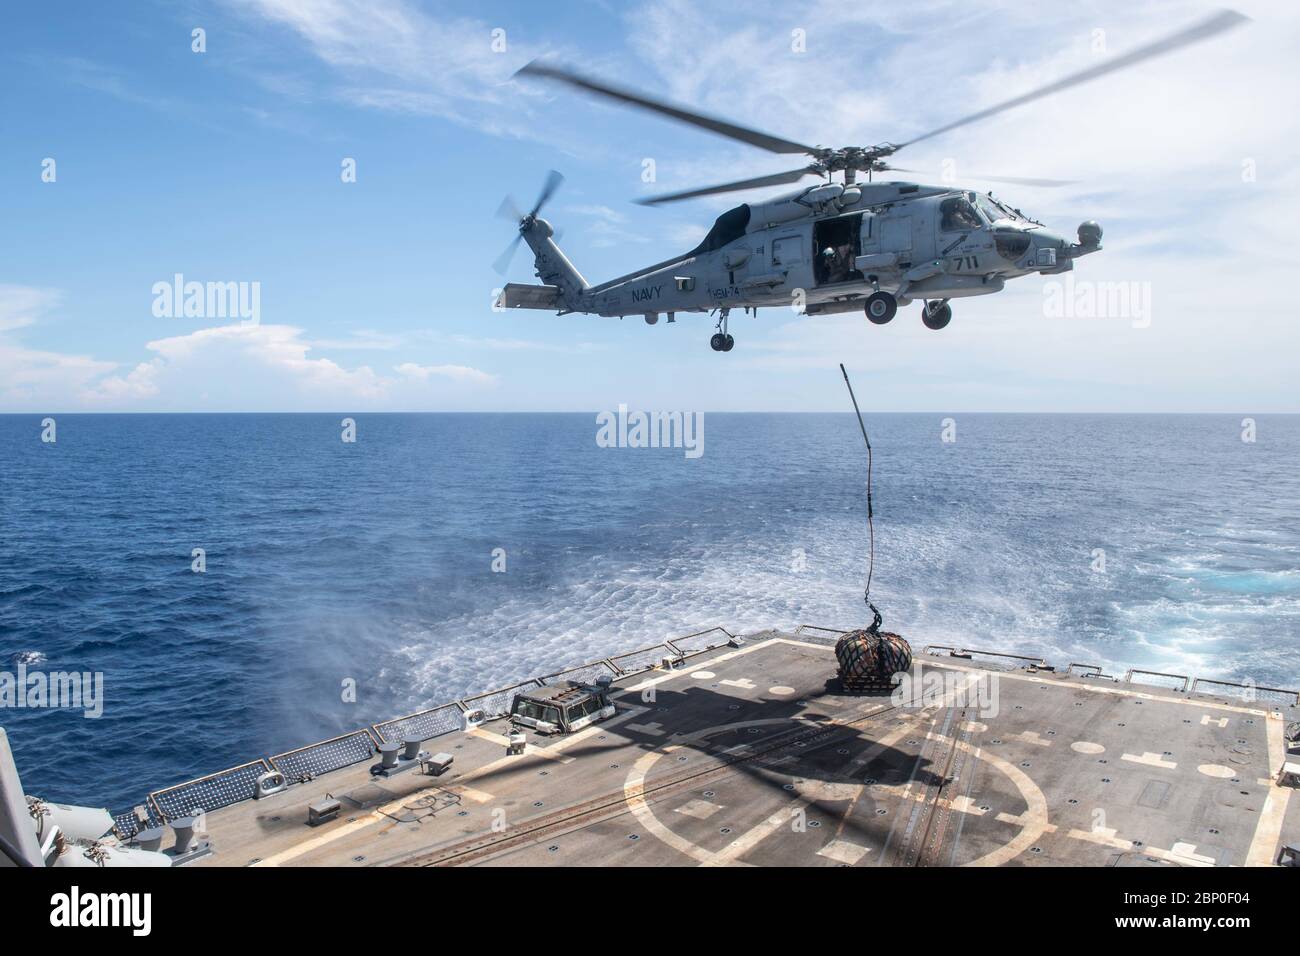 200428-N-OQ778-1374 GULF OF ADEN (April 28, 2020) An MH-60R Sea Hawk, attached to the “Swamp Foxes” of Helicopter Maritime Strike Squadron 74, conducts a simulated vertical replenishment aboard the guided-missile destroyer USS Truxtun (DDG 103) April 28, 2020. Truxtun is deployed to the U.S. 5th Fleet area of operations in support of naval operations to ensure maritime stability and security in the Central Region, connecting the Mediterranean and Pacific through the Western Indian Ocean and three strategic choke points. (U.S. Navy photo by Mass Communication Specialist 3rd Class Kody A. Philli Stock Photo